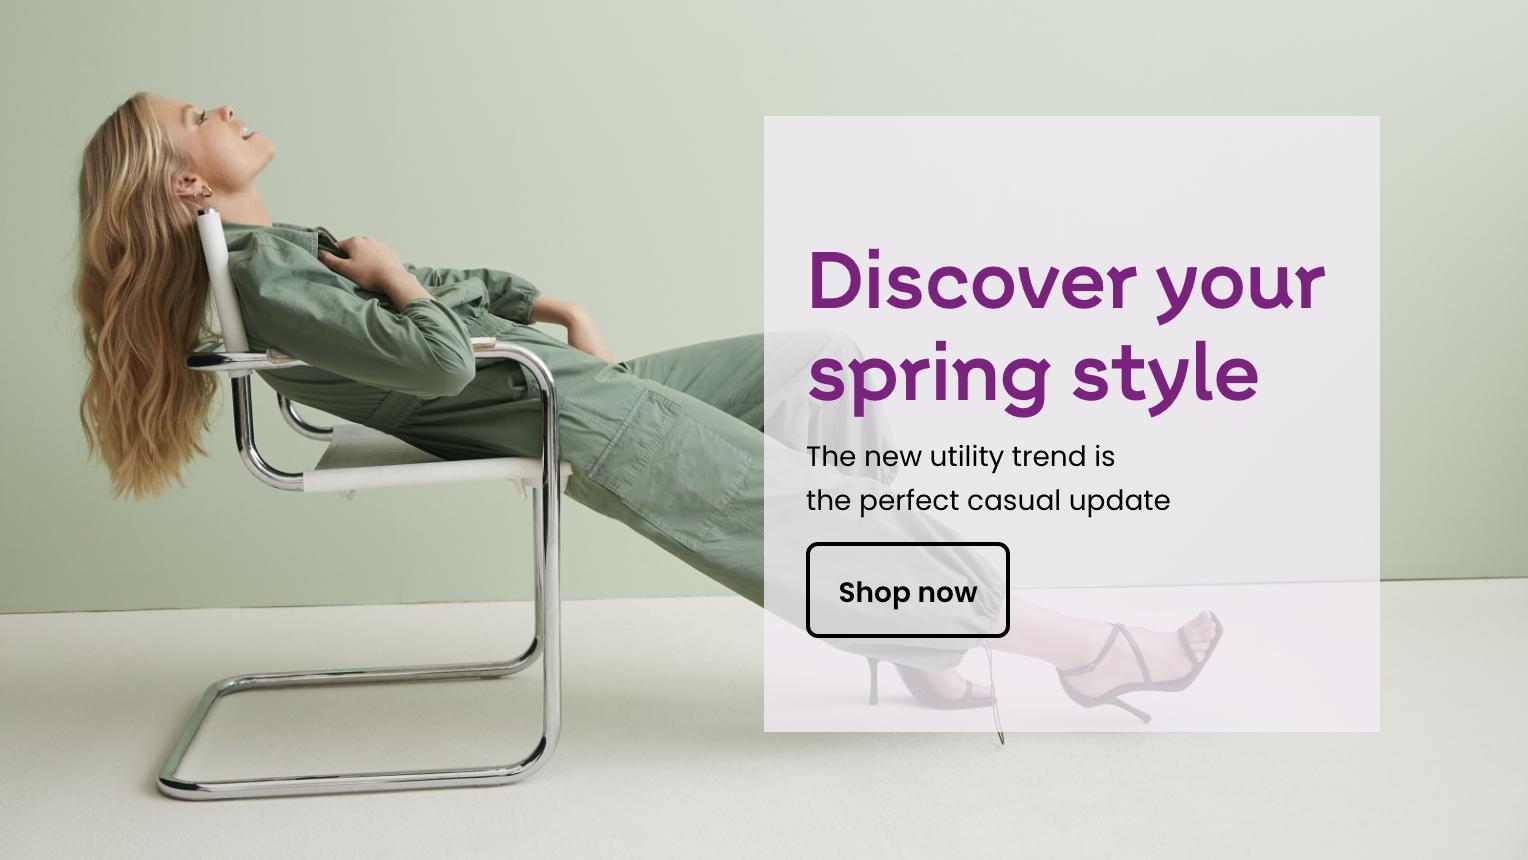 Discover your
spring style
Looks to know for
the season ahead
Shop now